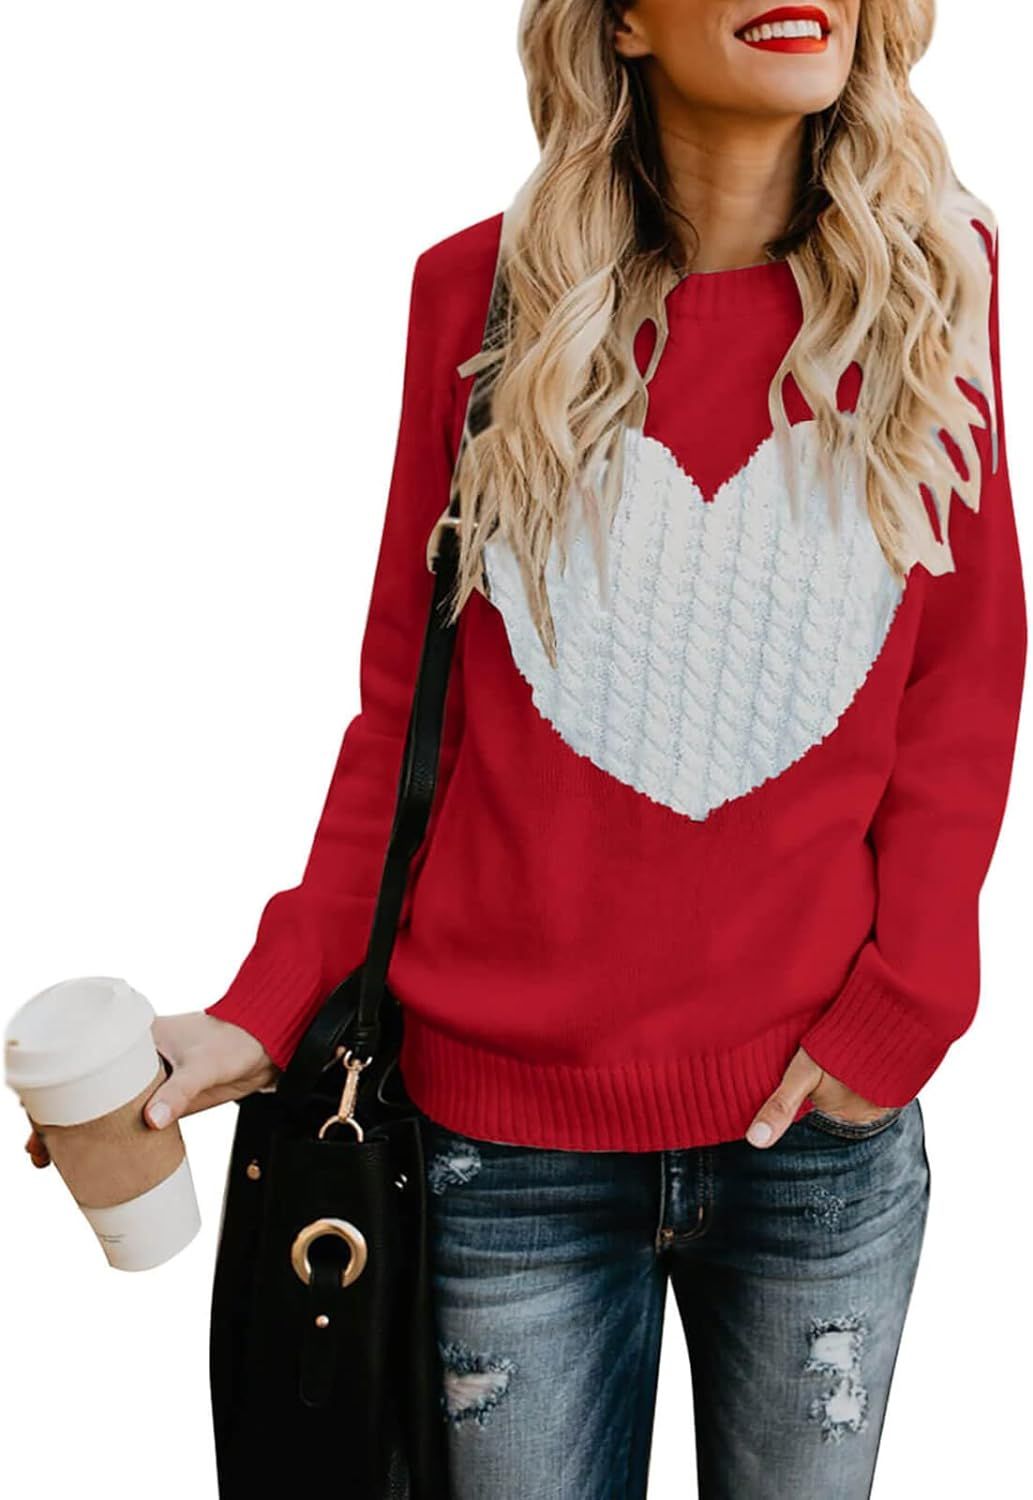 shermie Women's Pullover Sweaters Long Sleeve Crewneck Cute Heart Knitted Casual Sweater | Amazon (US)